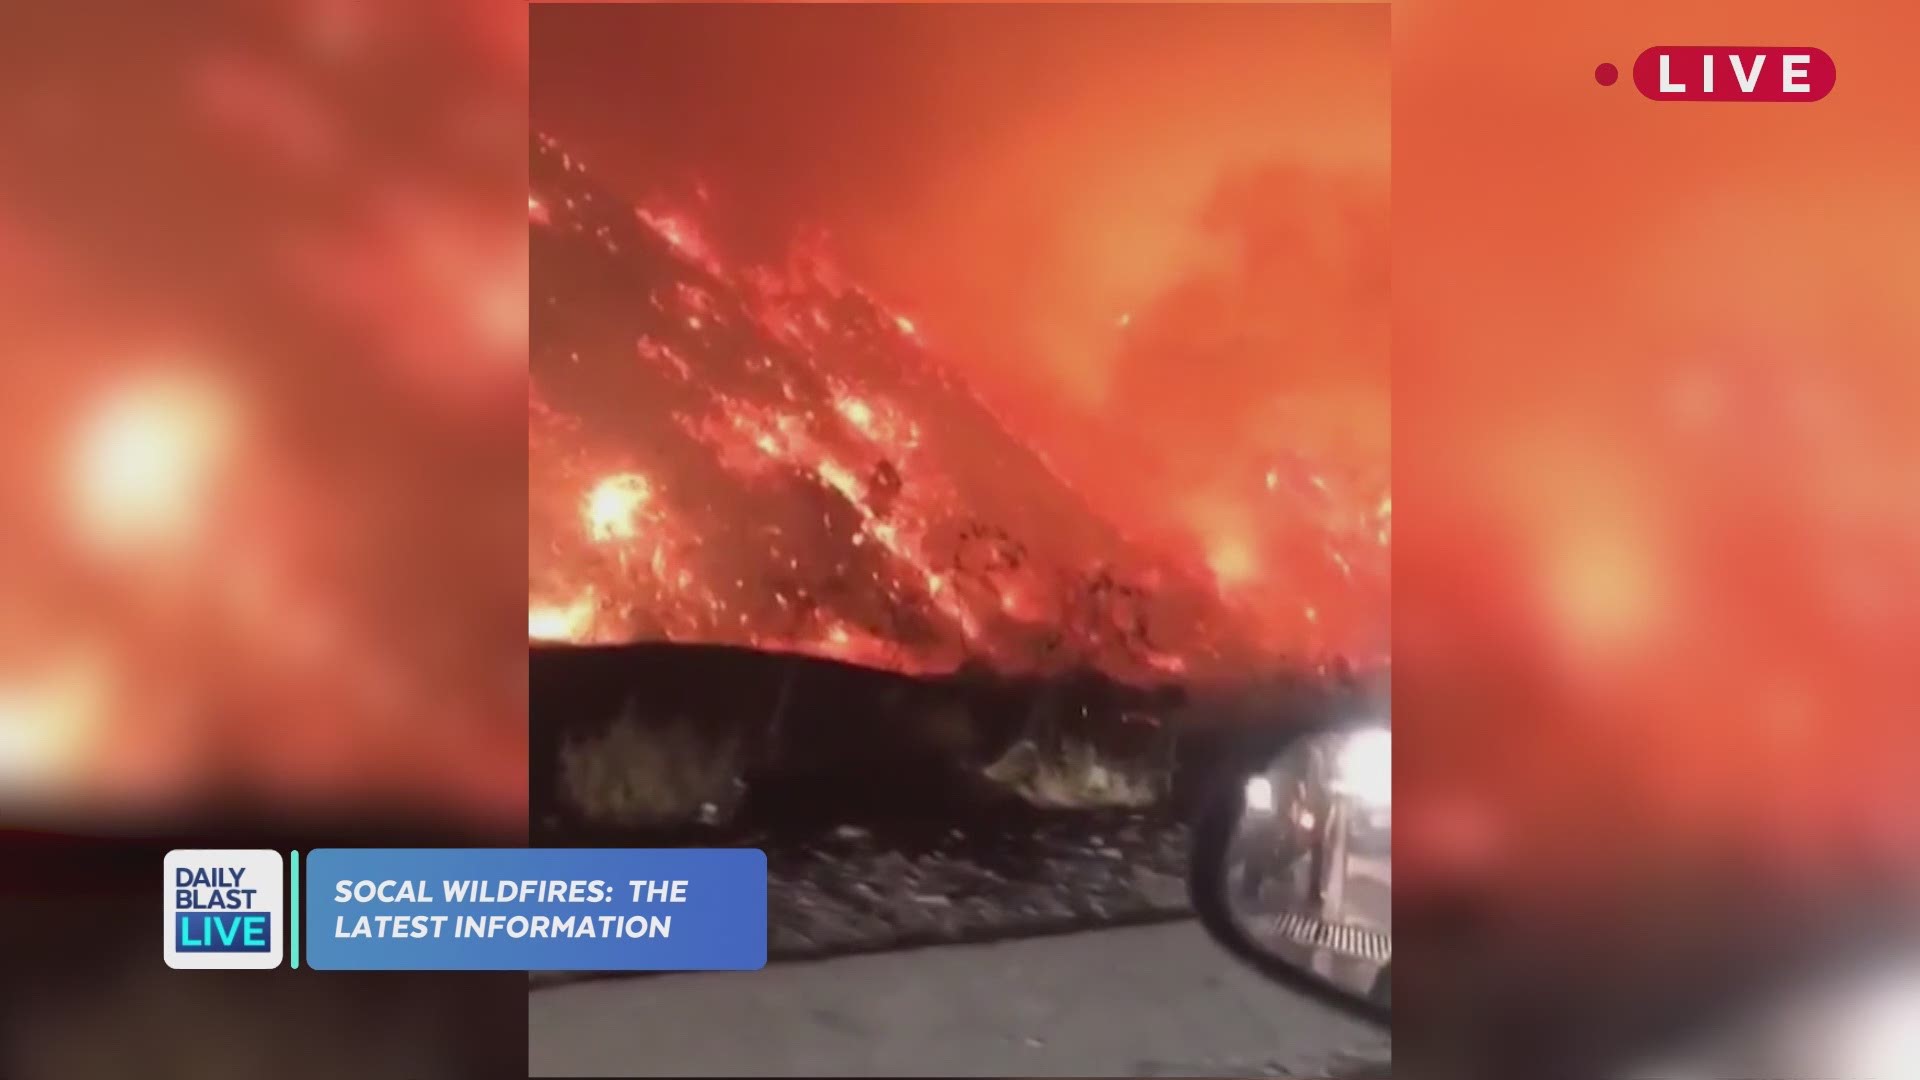 Southern California wildfires ignite in the heart of the city. We spoke with a Los Angeles reporter about the current situation. The weather is not cooperating with the hundreds of officials trying to contain the fires in the region. Red flag warnings hav